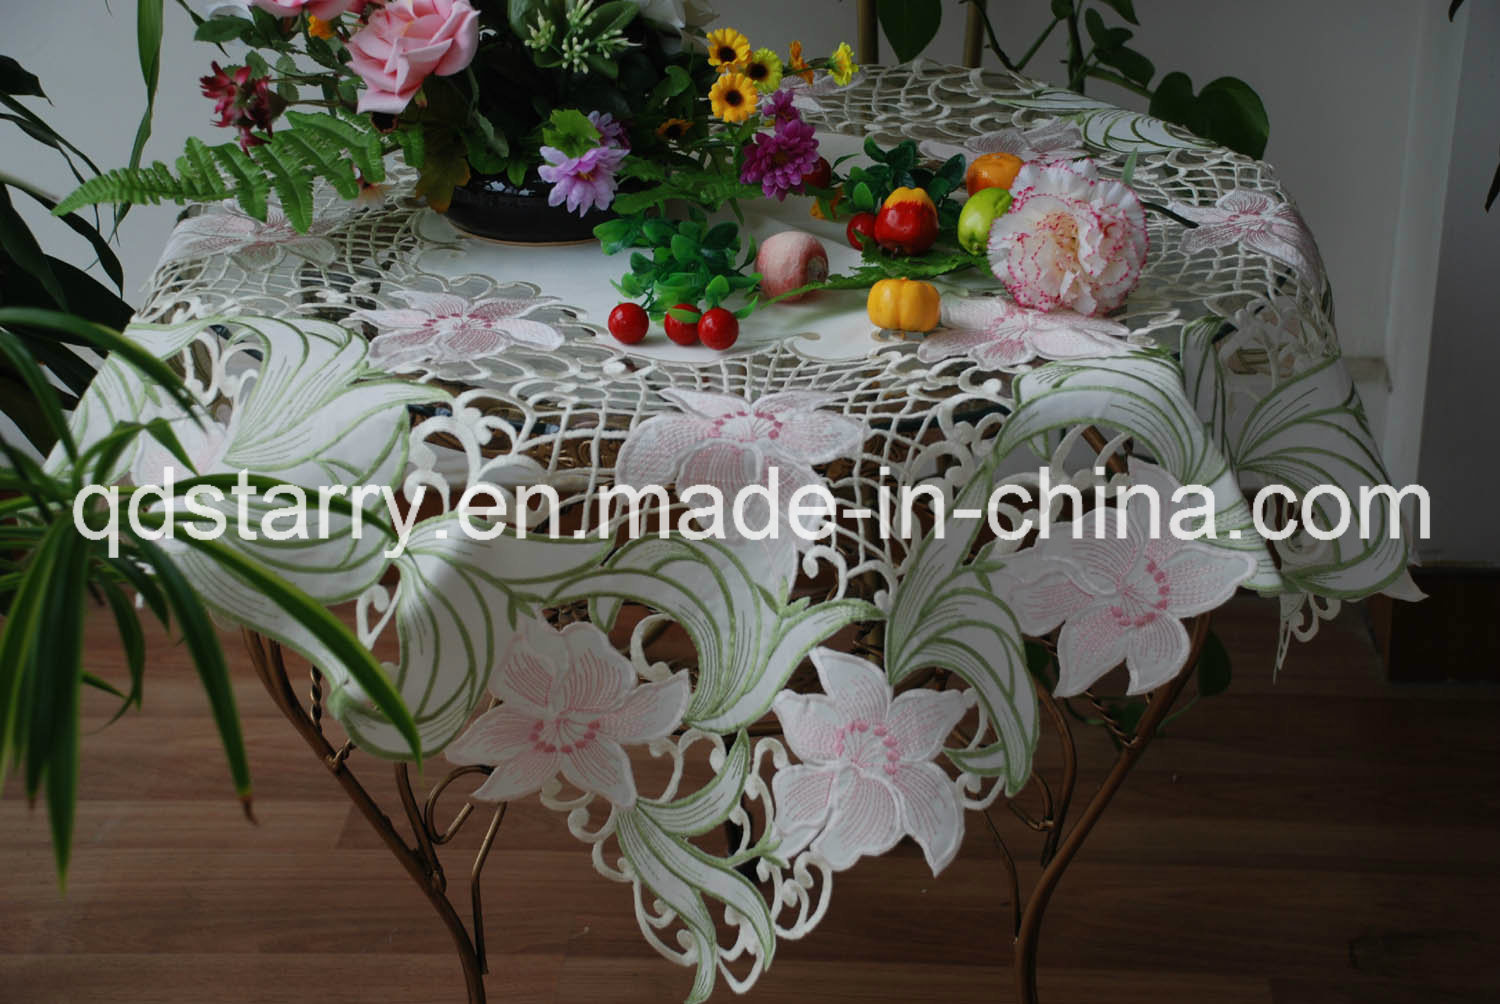 Shandong Province Embroidery Table Cloth